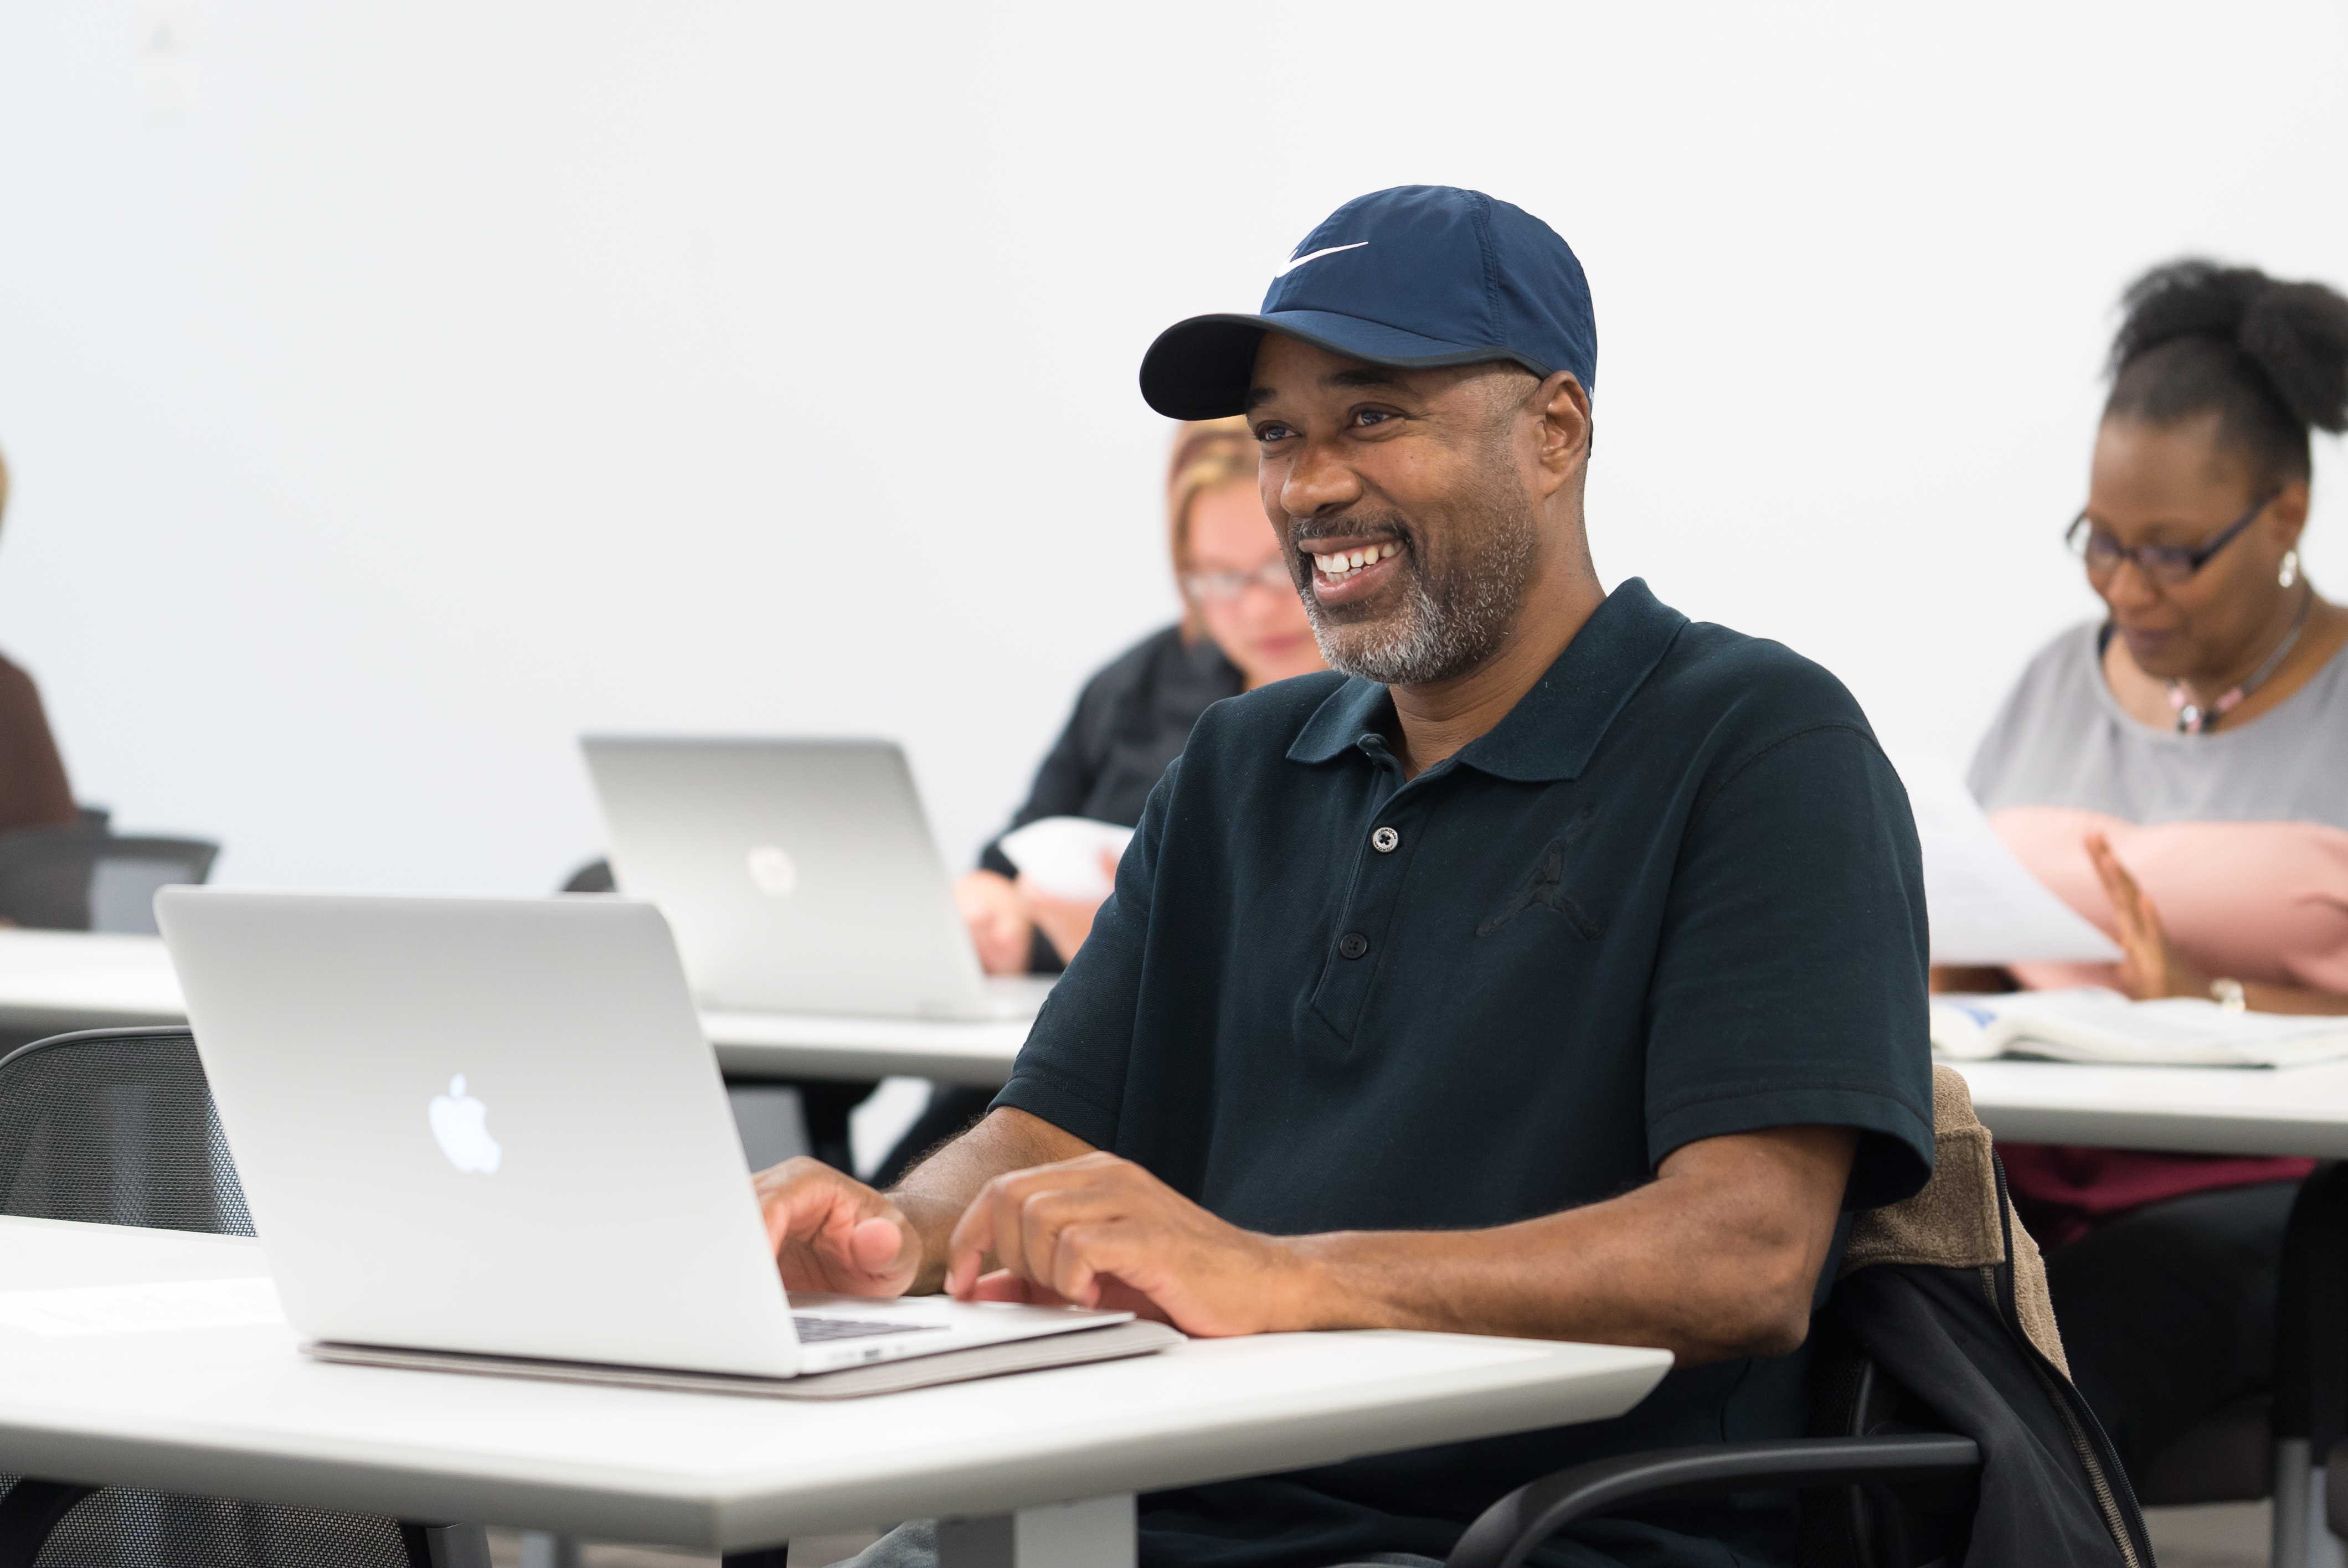 Students sit in a classroom in front of laptops wearing casual clothes, smiling towards an instructor who is off screen. 